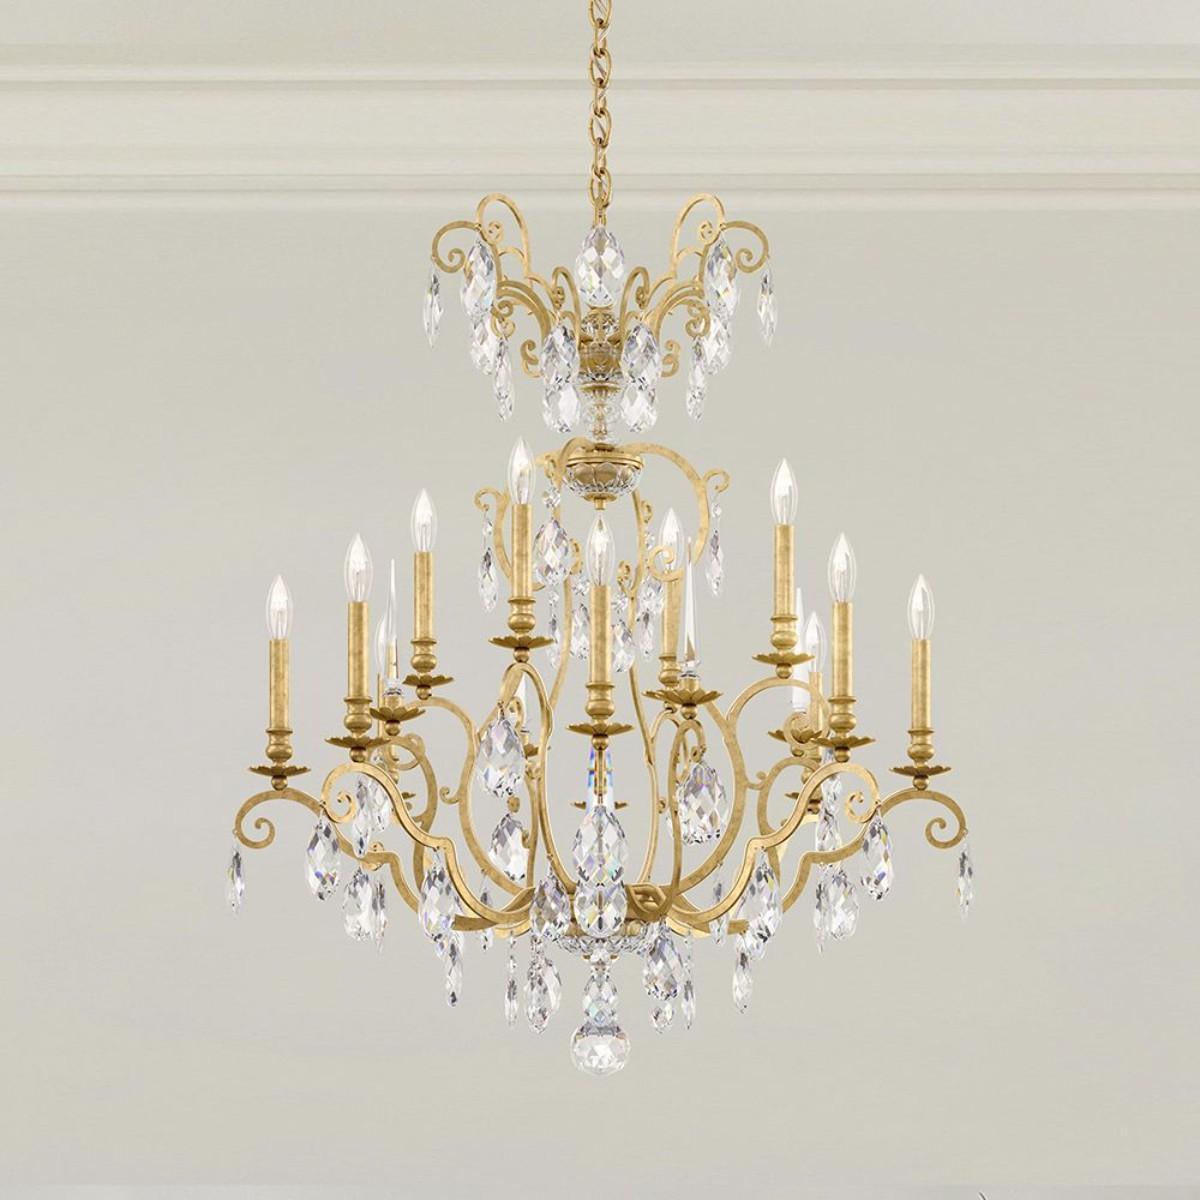 Renaissance Nouveau 12 Light Chandelier with Heritage Crystal - Bees Lighting